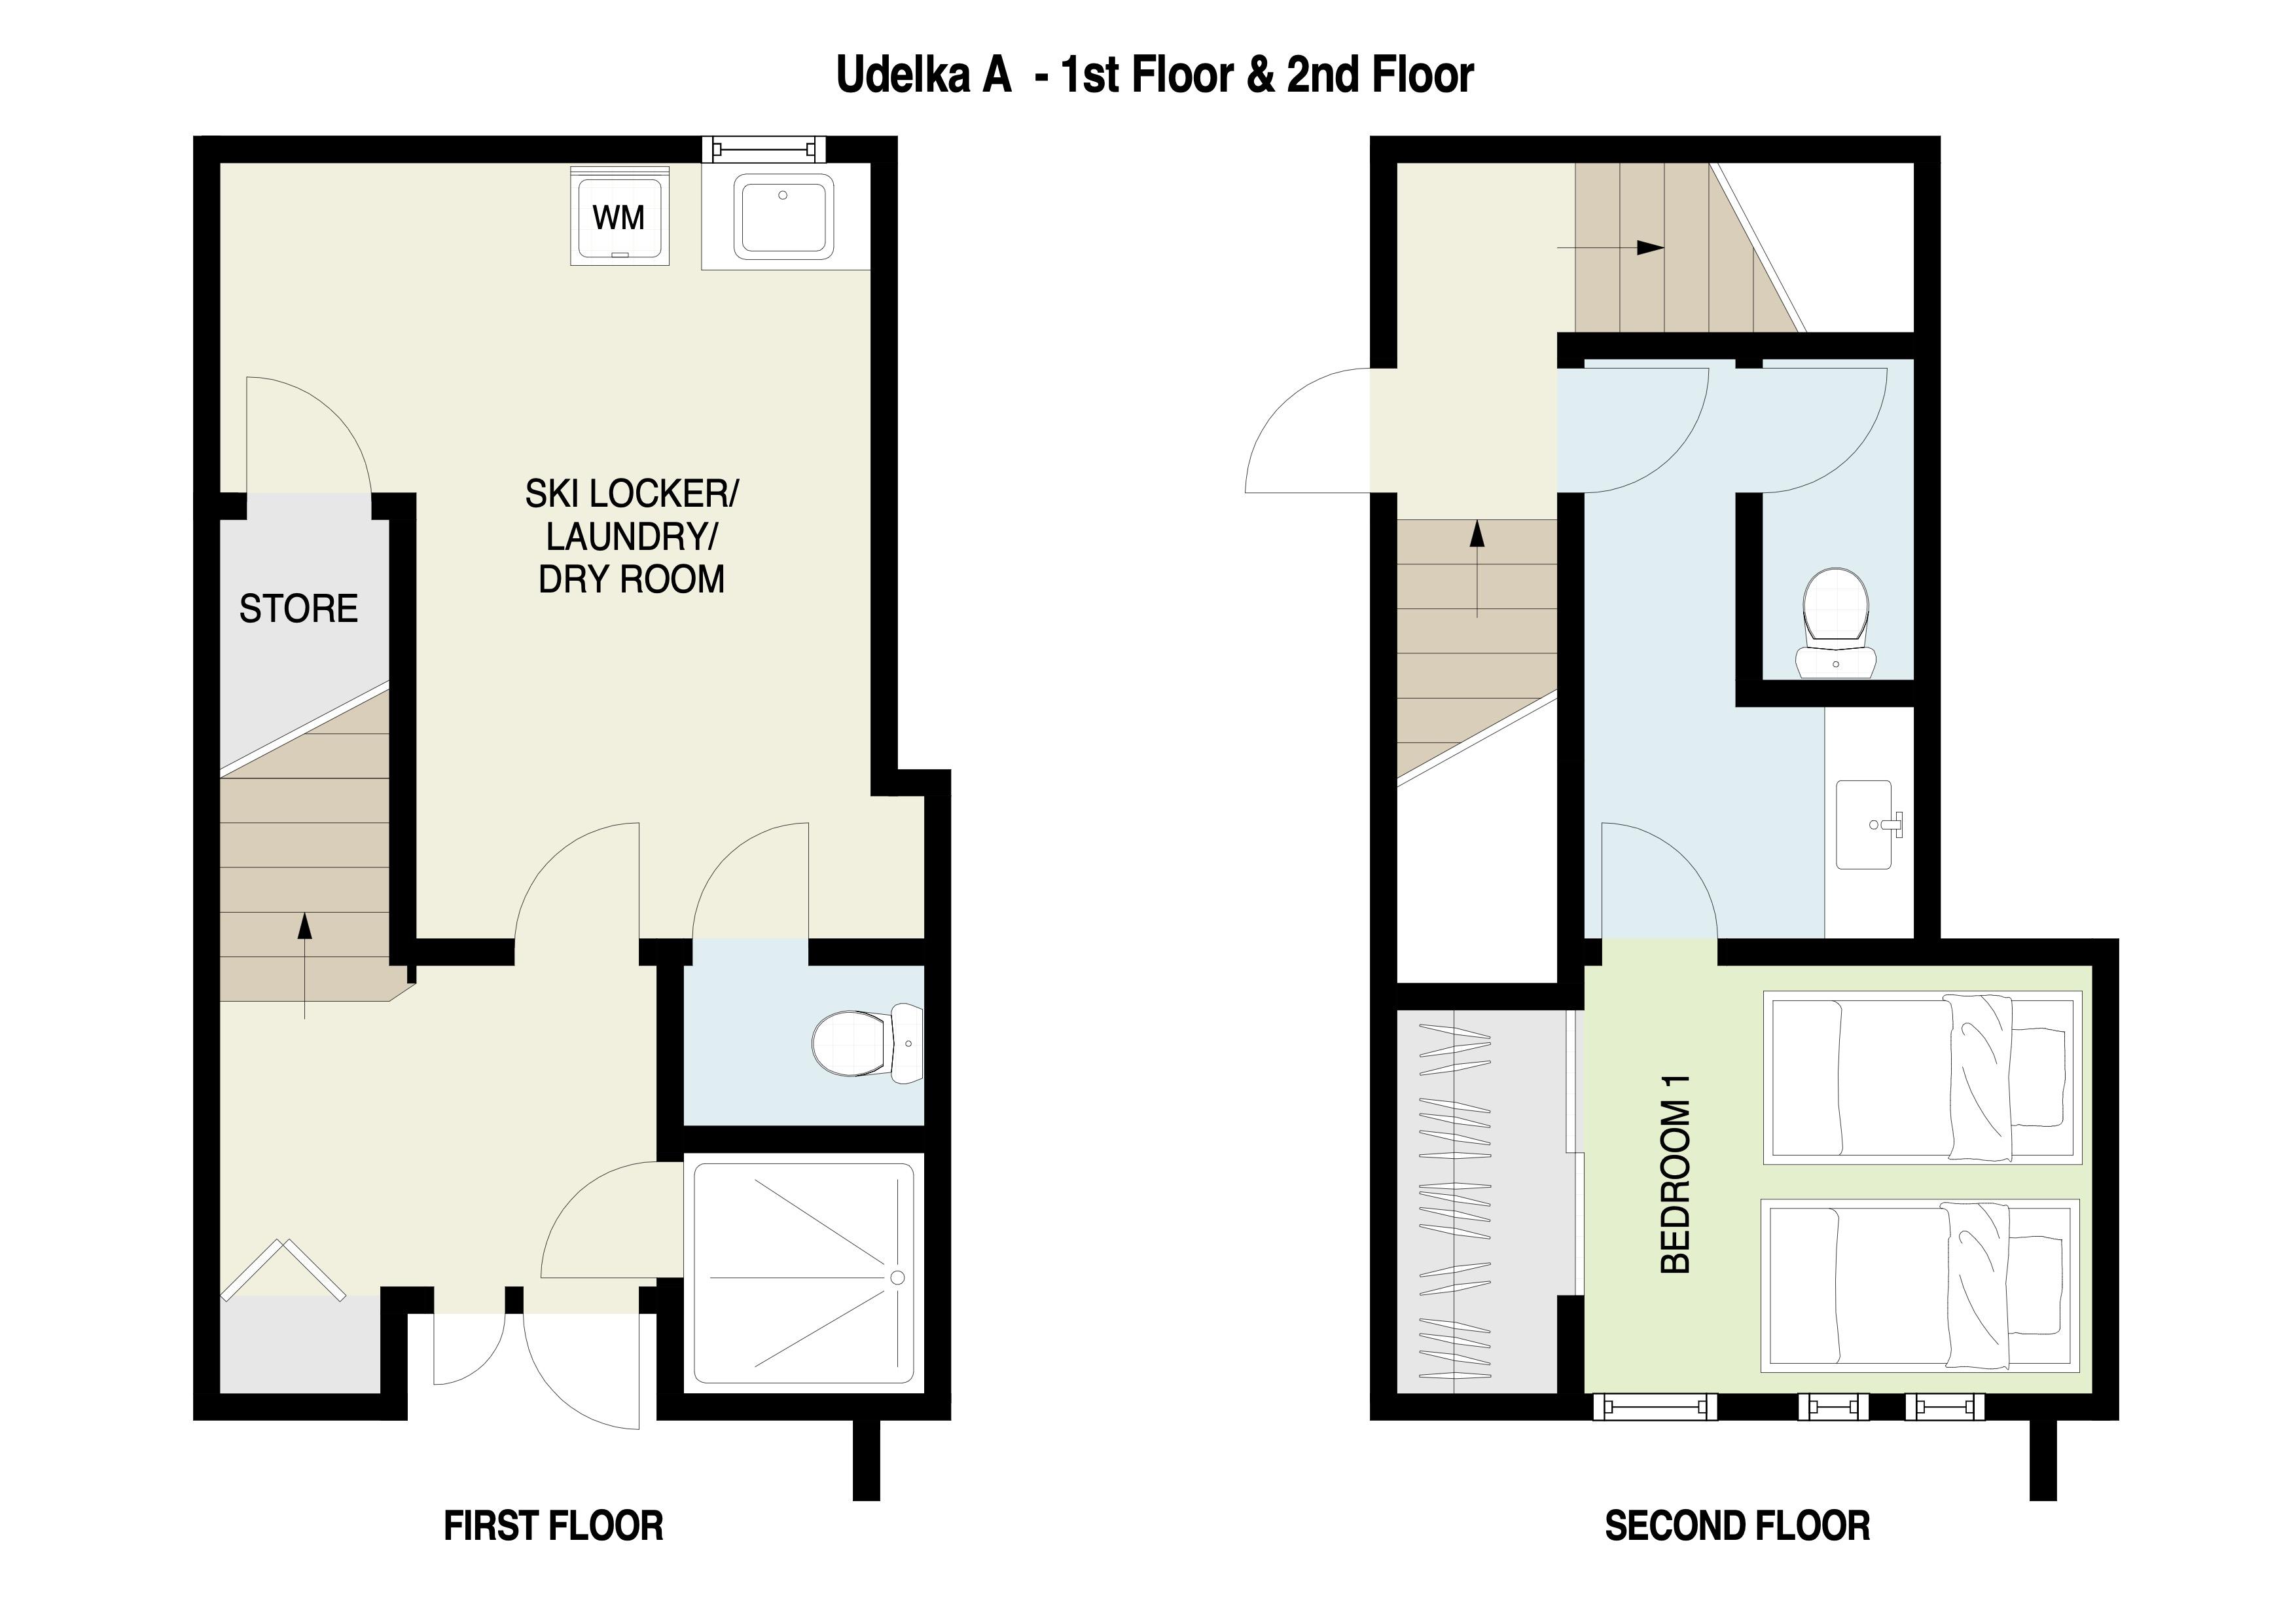 Udelka A  1st and 2nd Floor plans